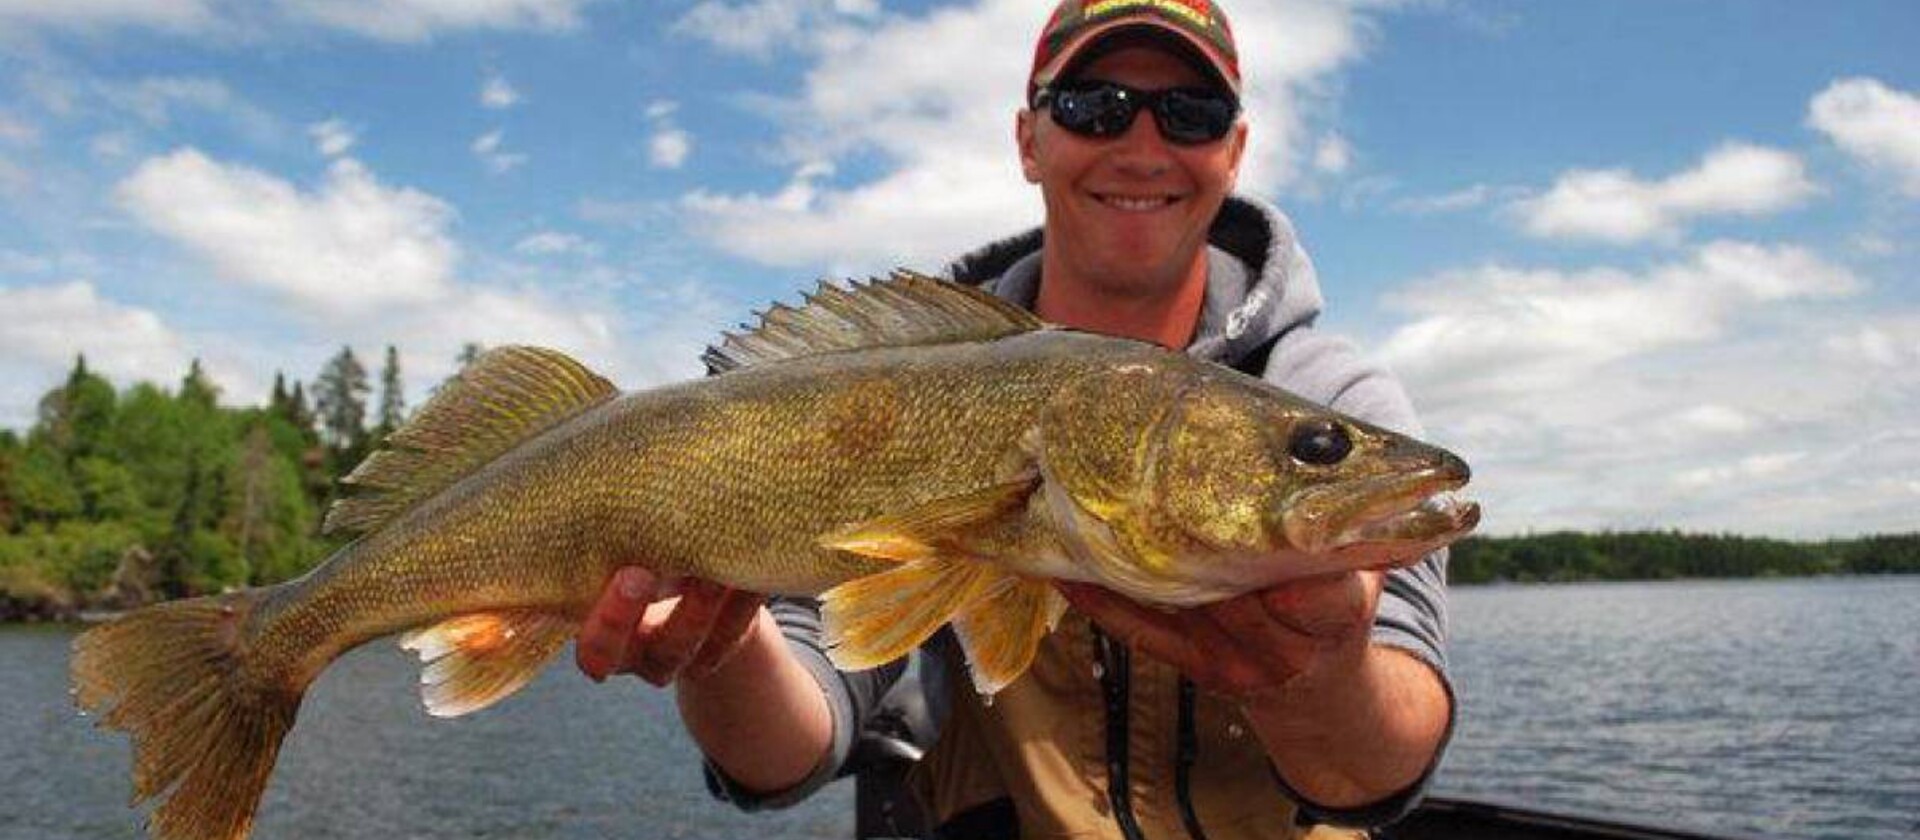 Lake Erie walleye anglers heading north for success - The Beacon